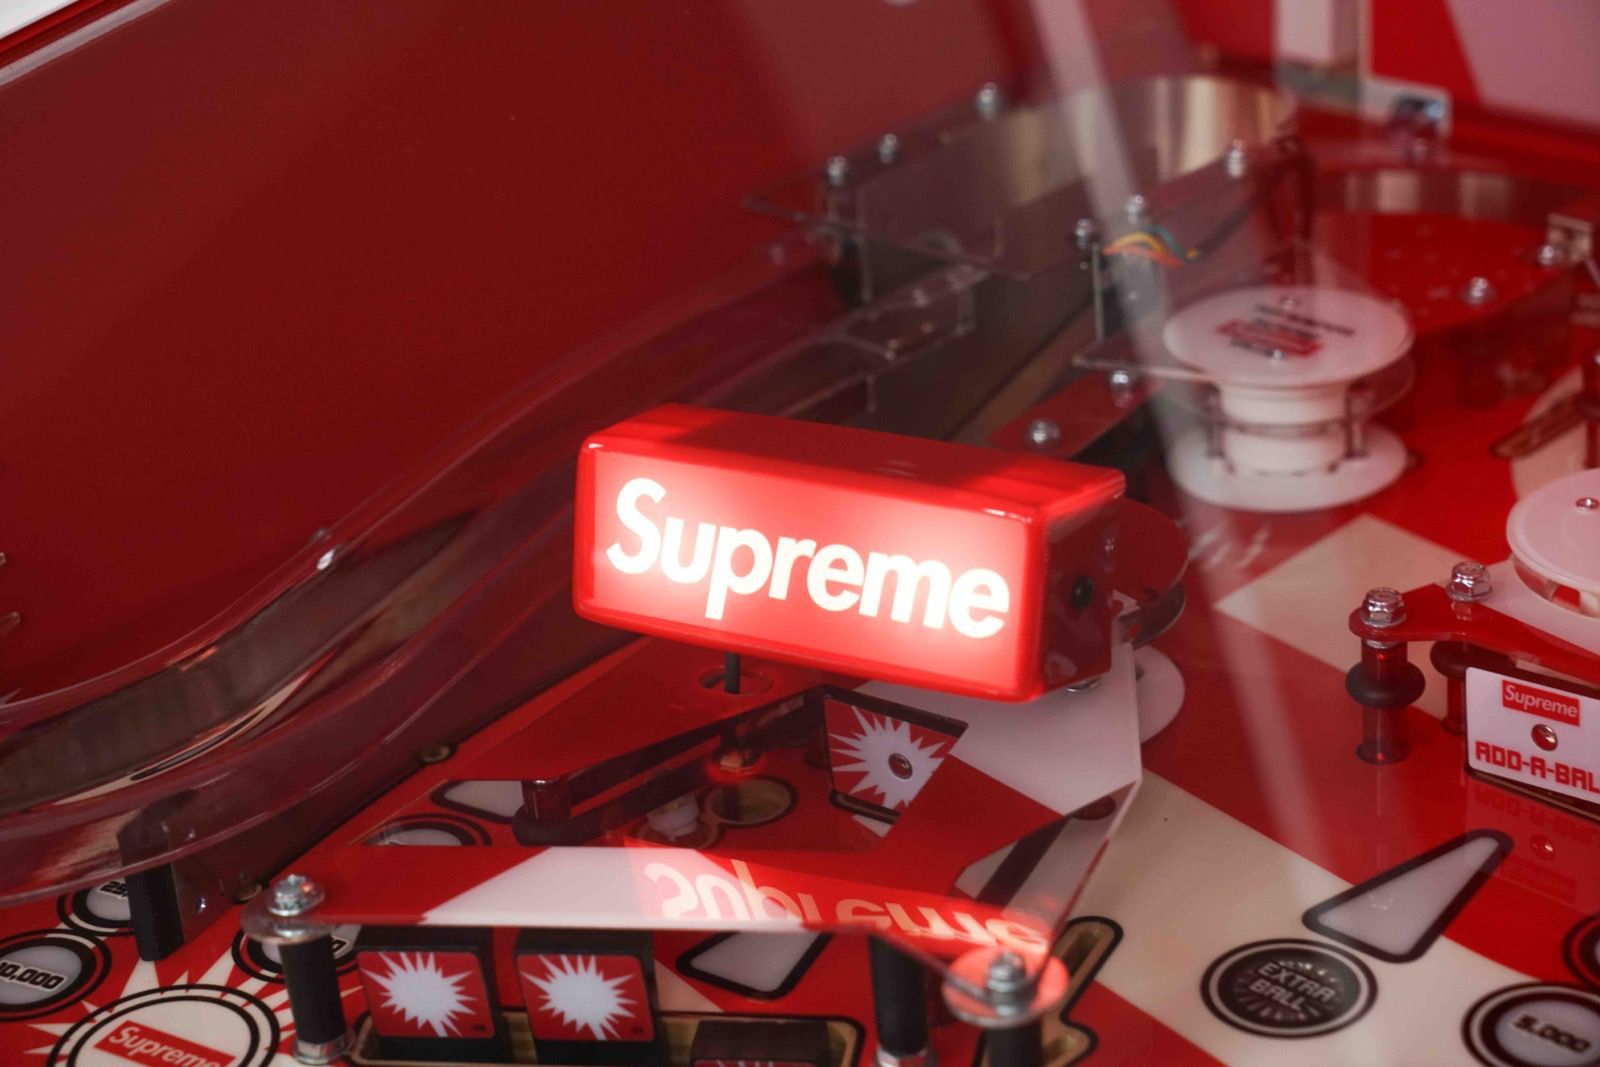 Sotheby's will host the largest ever Supreme auction 1306 Supreme accessories will be auctioned off in Hong Kong